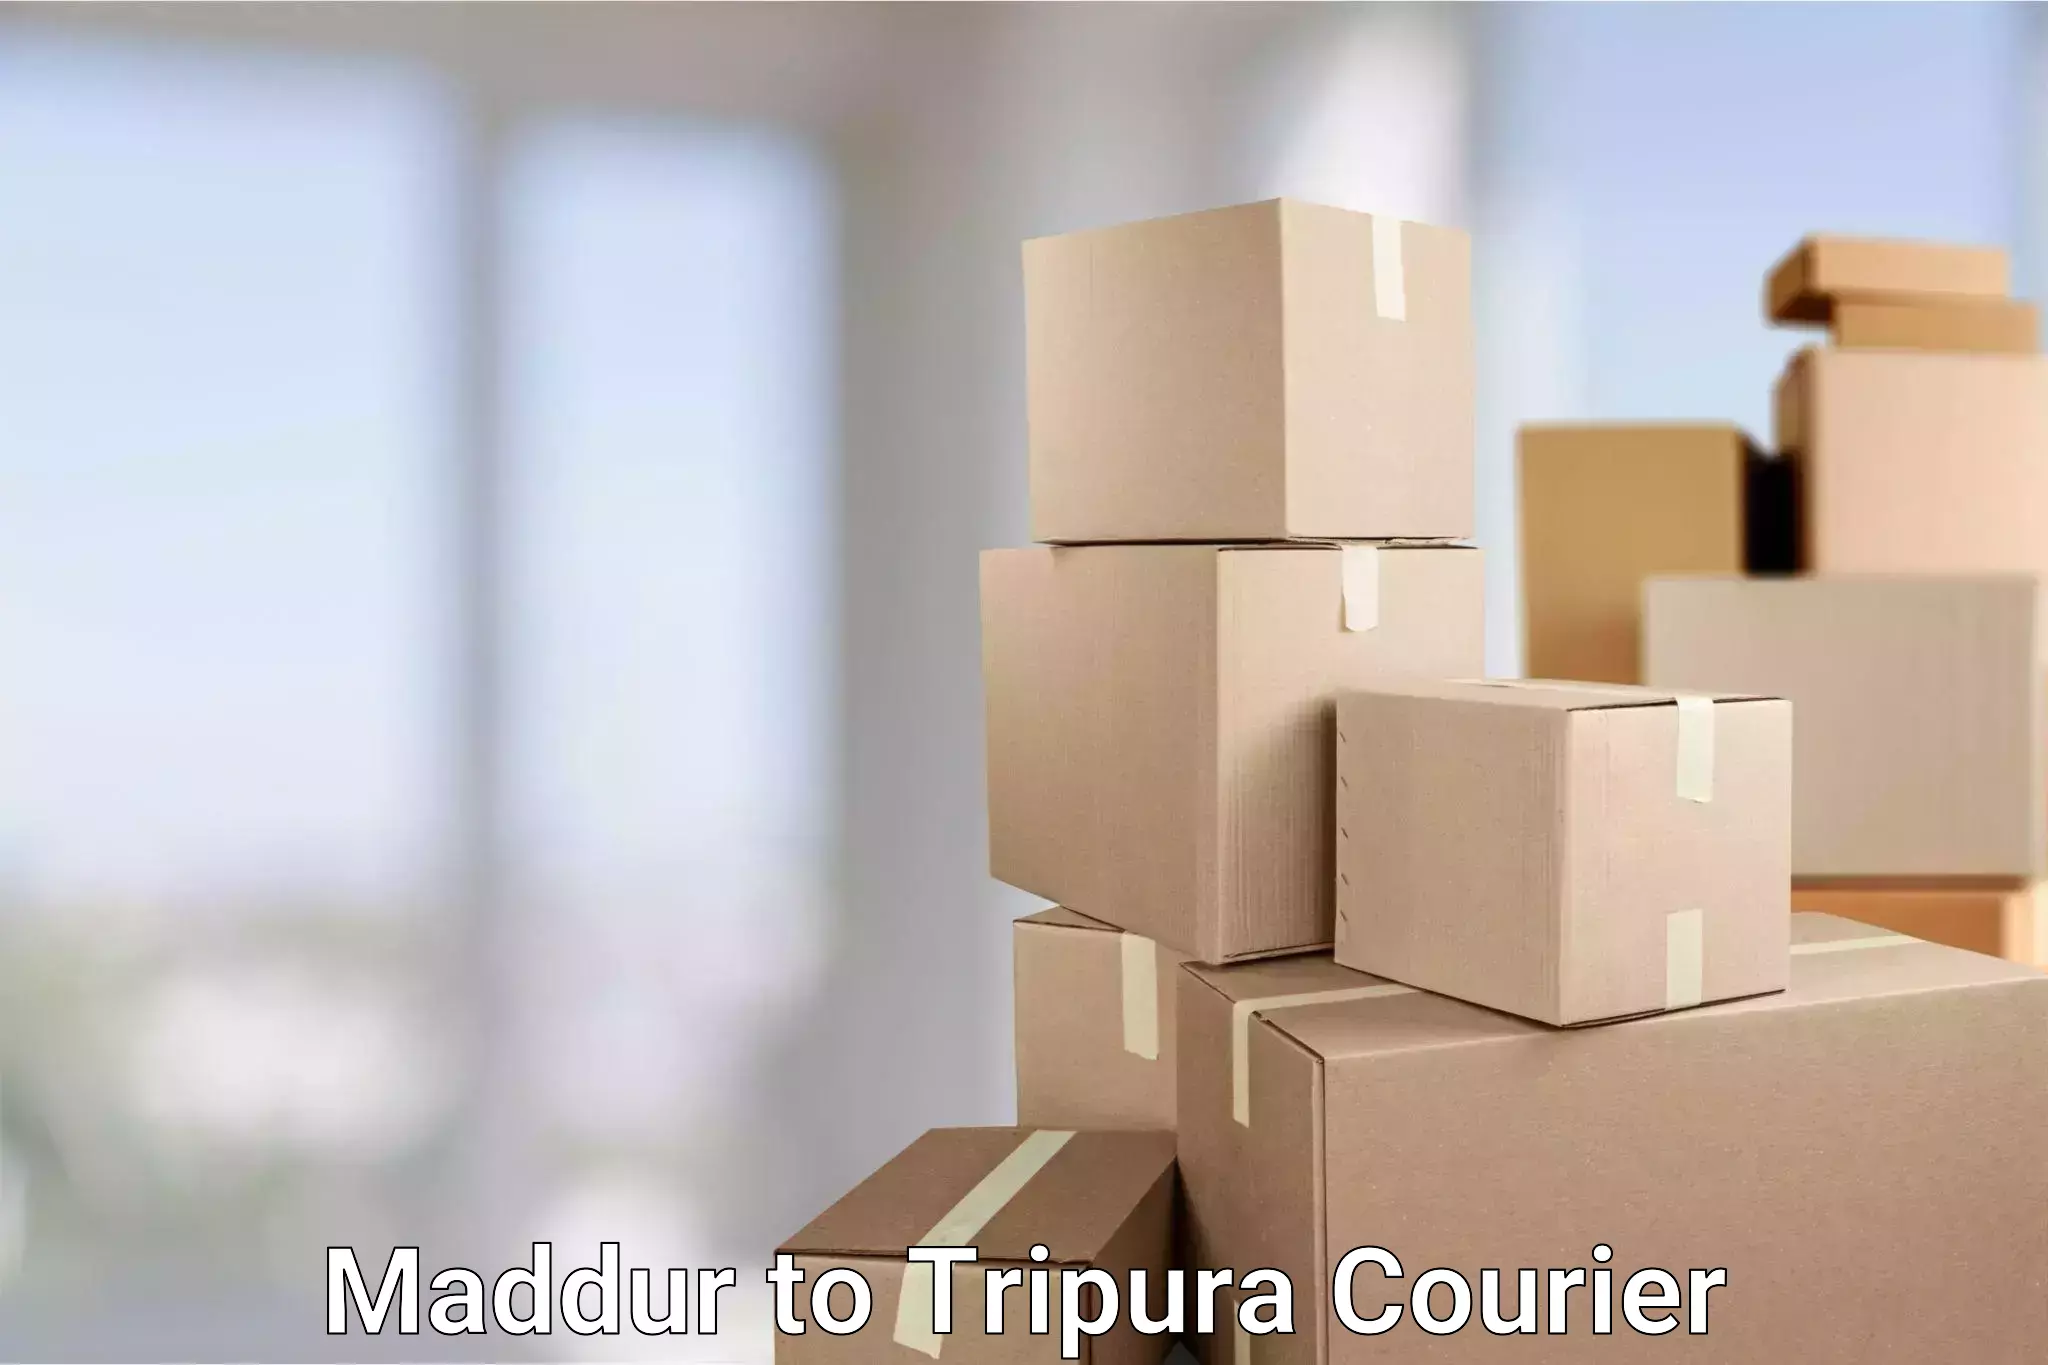 Diverse delivery methods Maddur to Udaipur Tripura